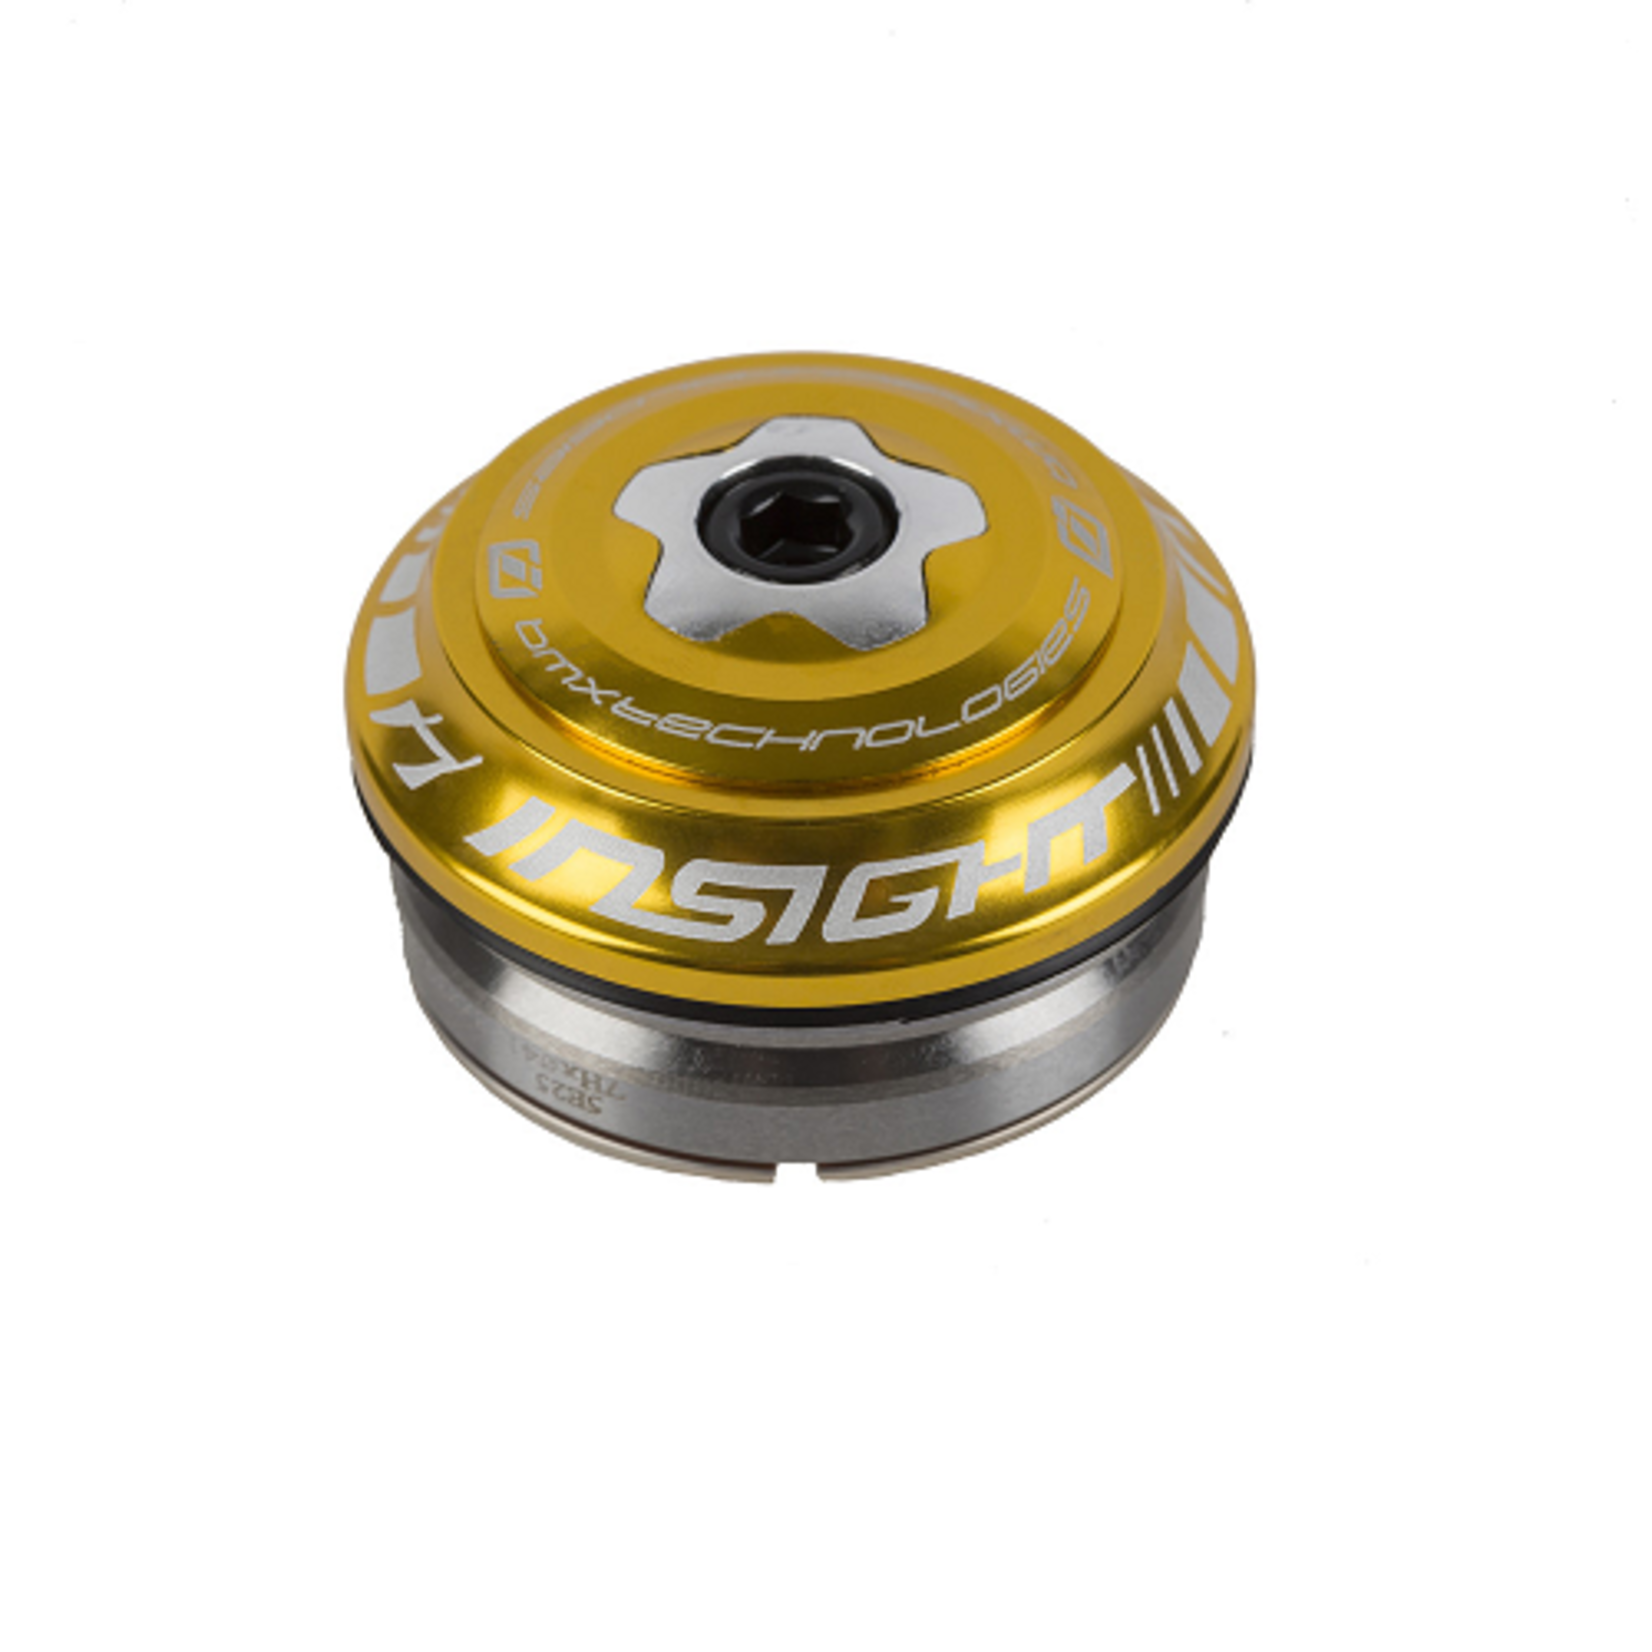 Insight Insight Integrated Headset 1-1/8'' Gold